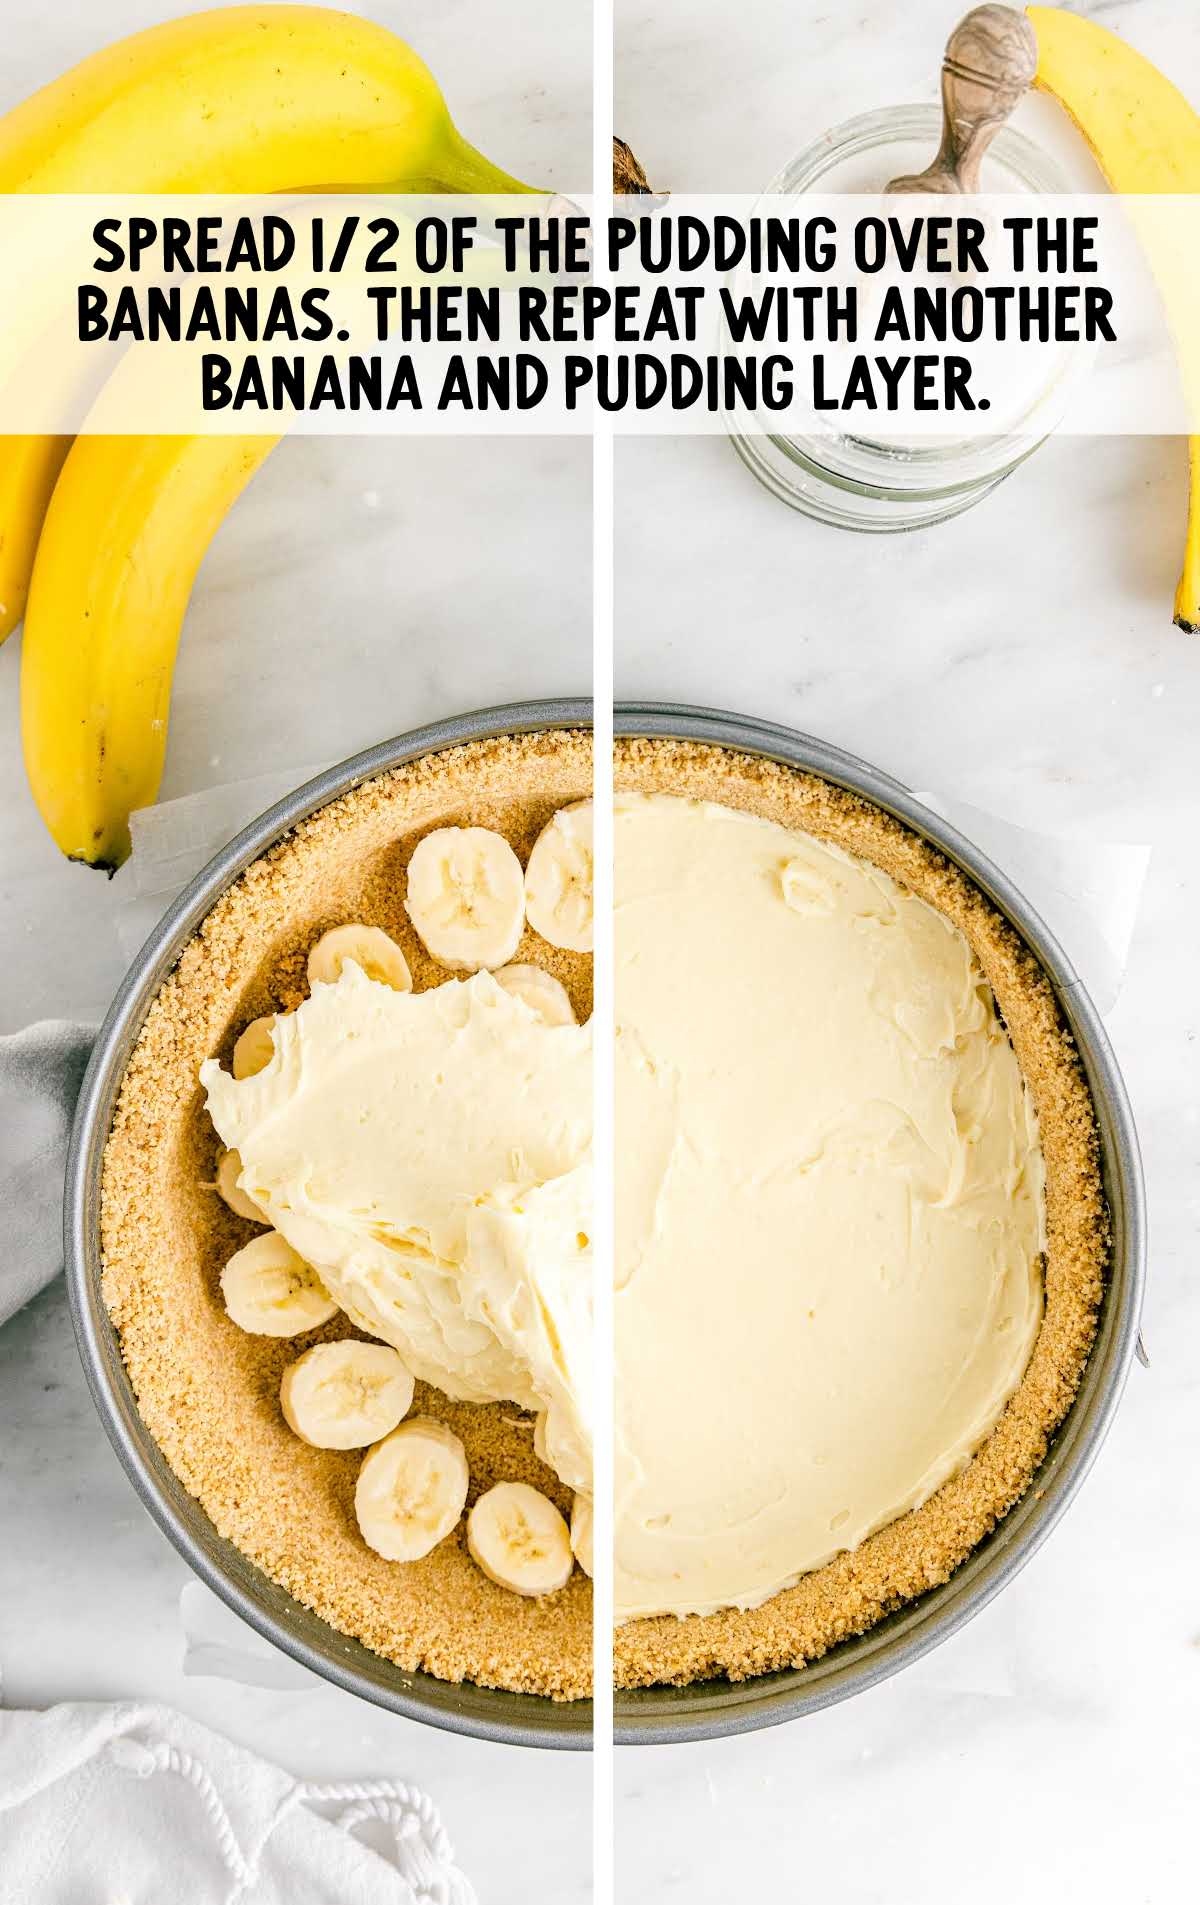 banana slices and pudding mixture spread on top of the crust